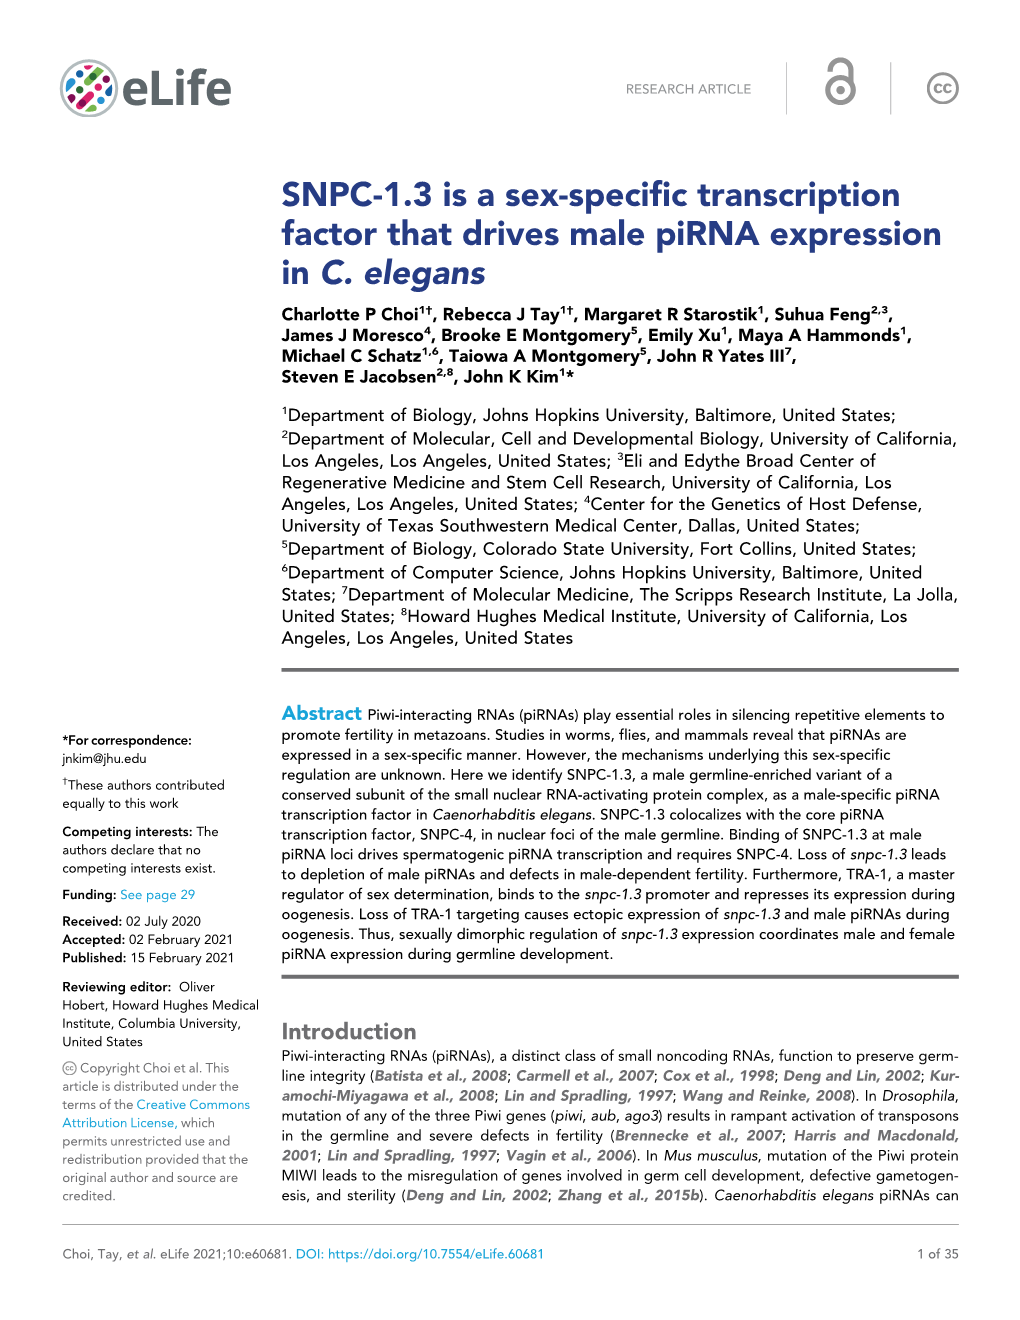 SNPC-1.3 Is a Sex-Specific Transcription Factor That Drives Male Pirna Expression in C